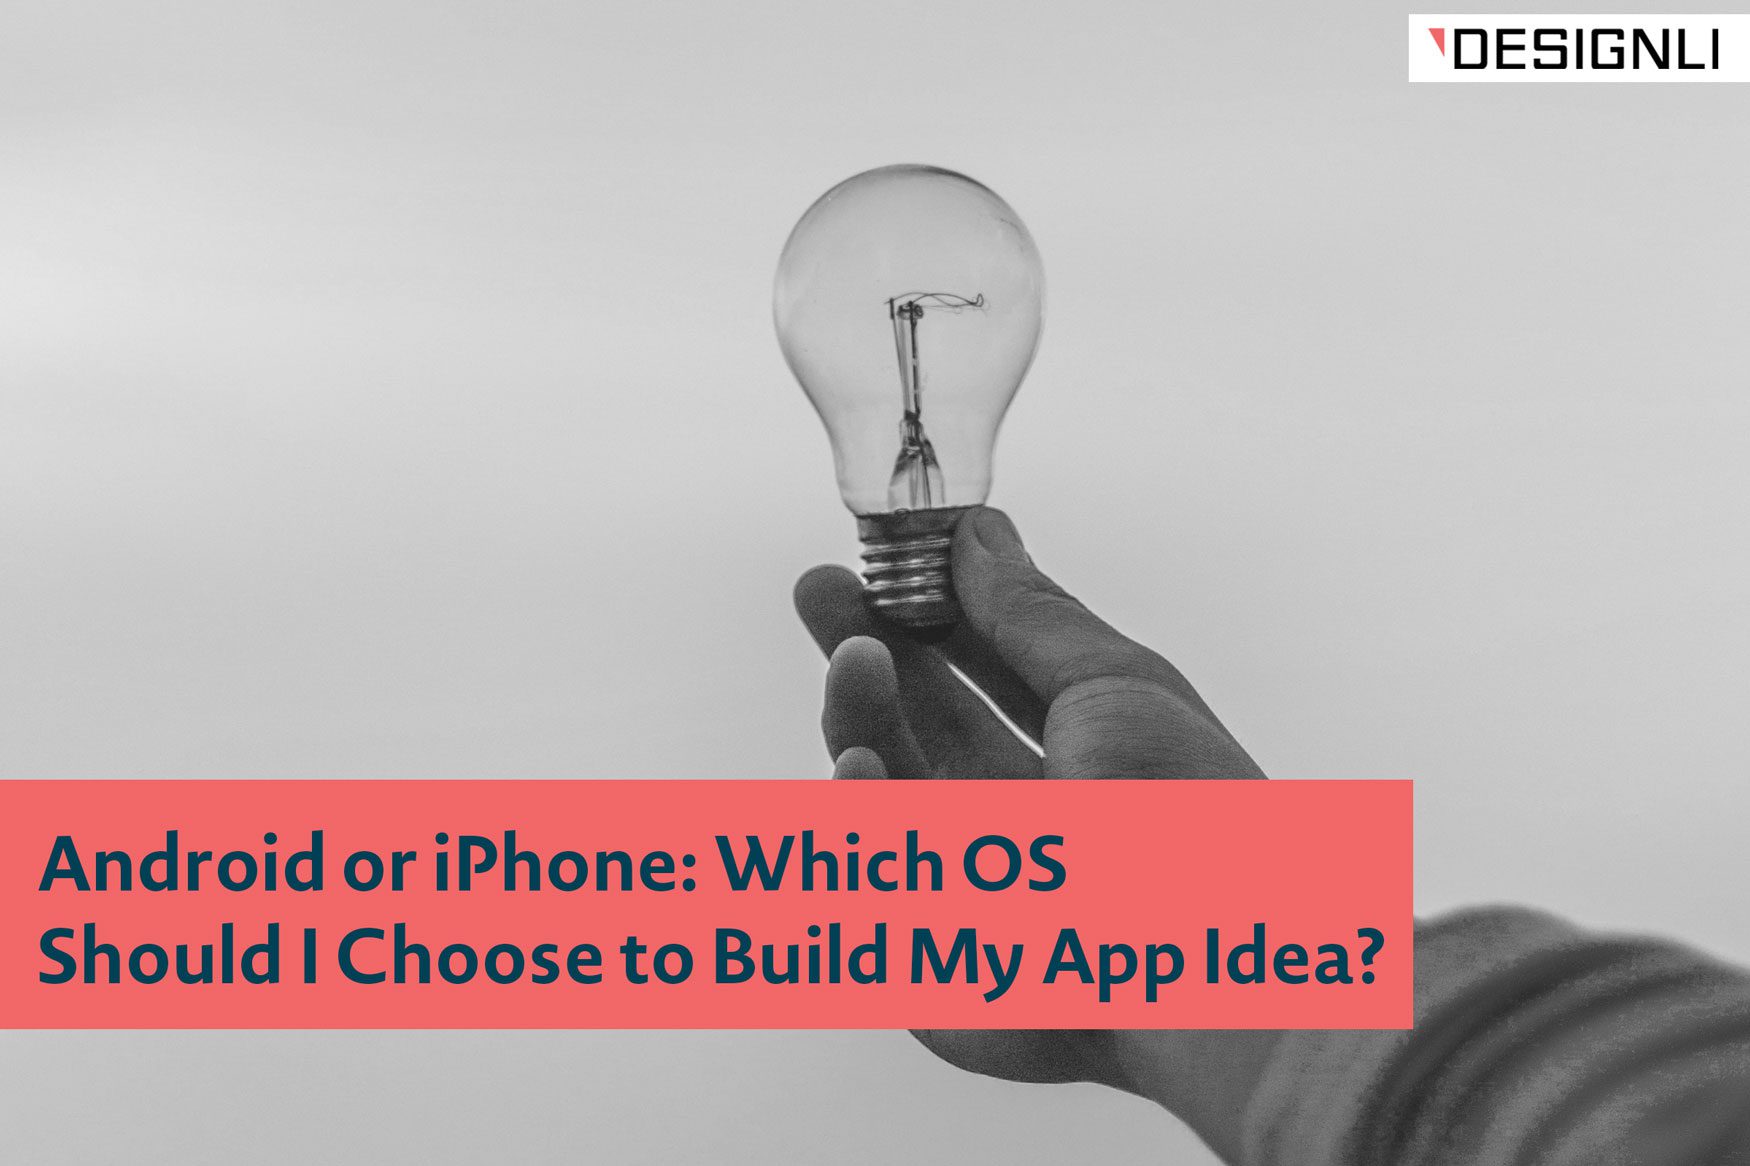 Android or iPhone: Which OS Should I Choose to Build My App Idea?